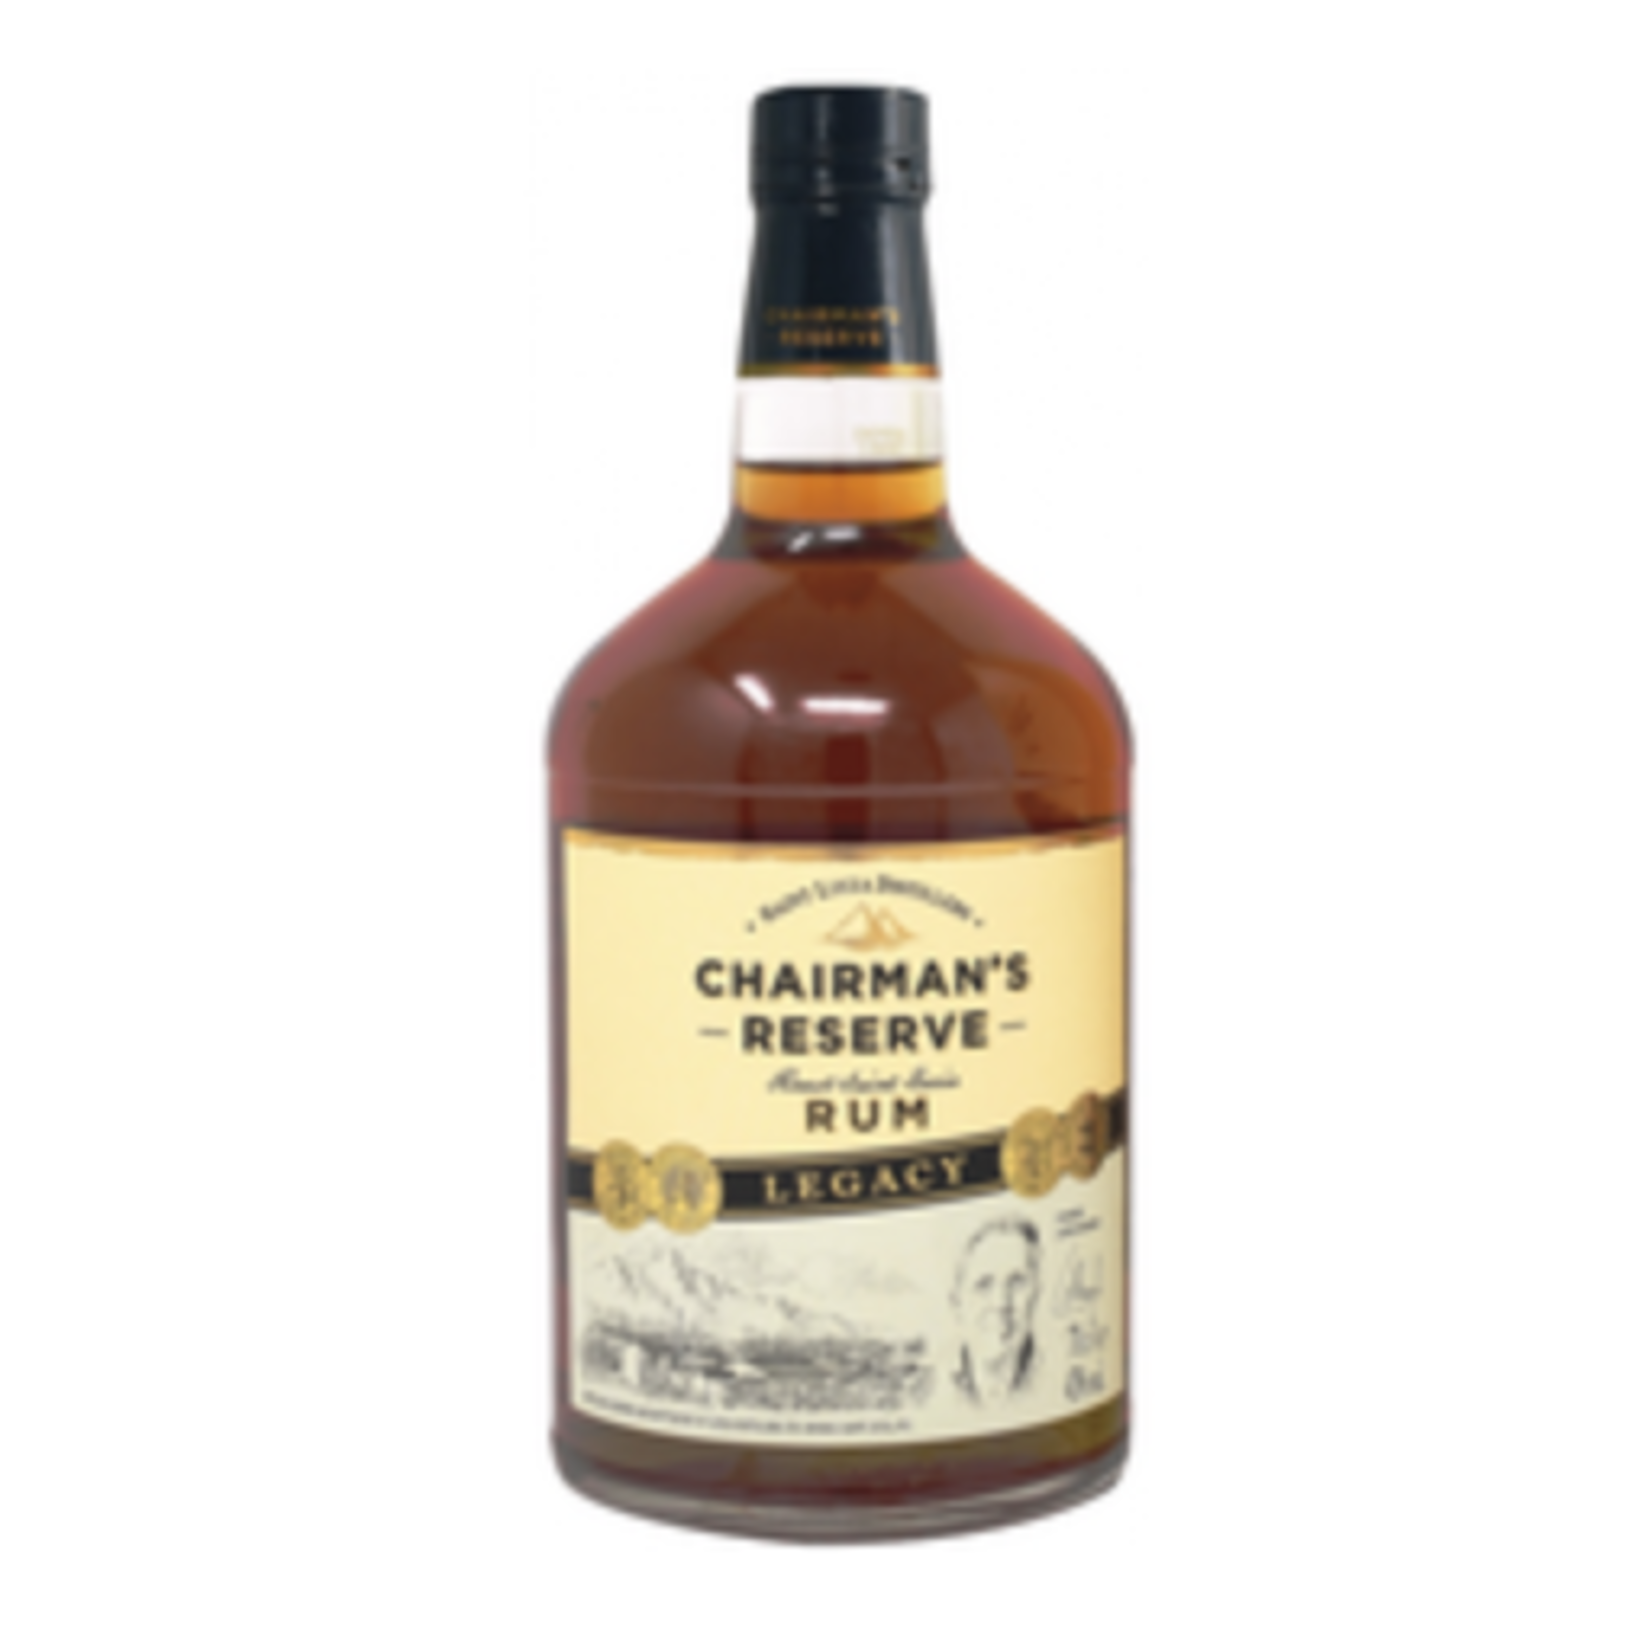 Chairman's Reserve, Legacy Rum St. Lucia